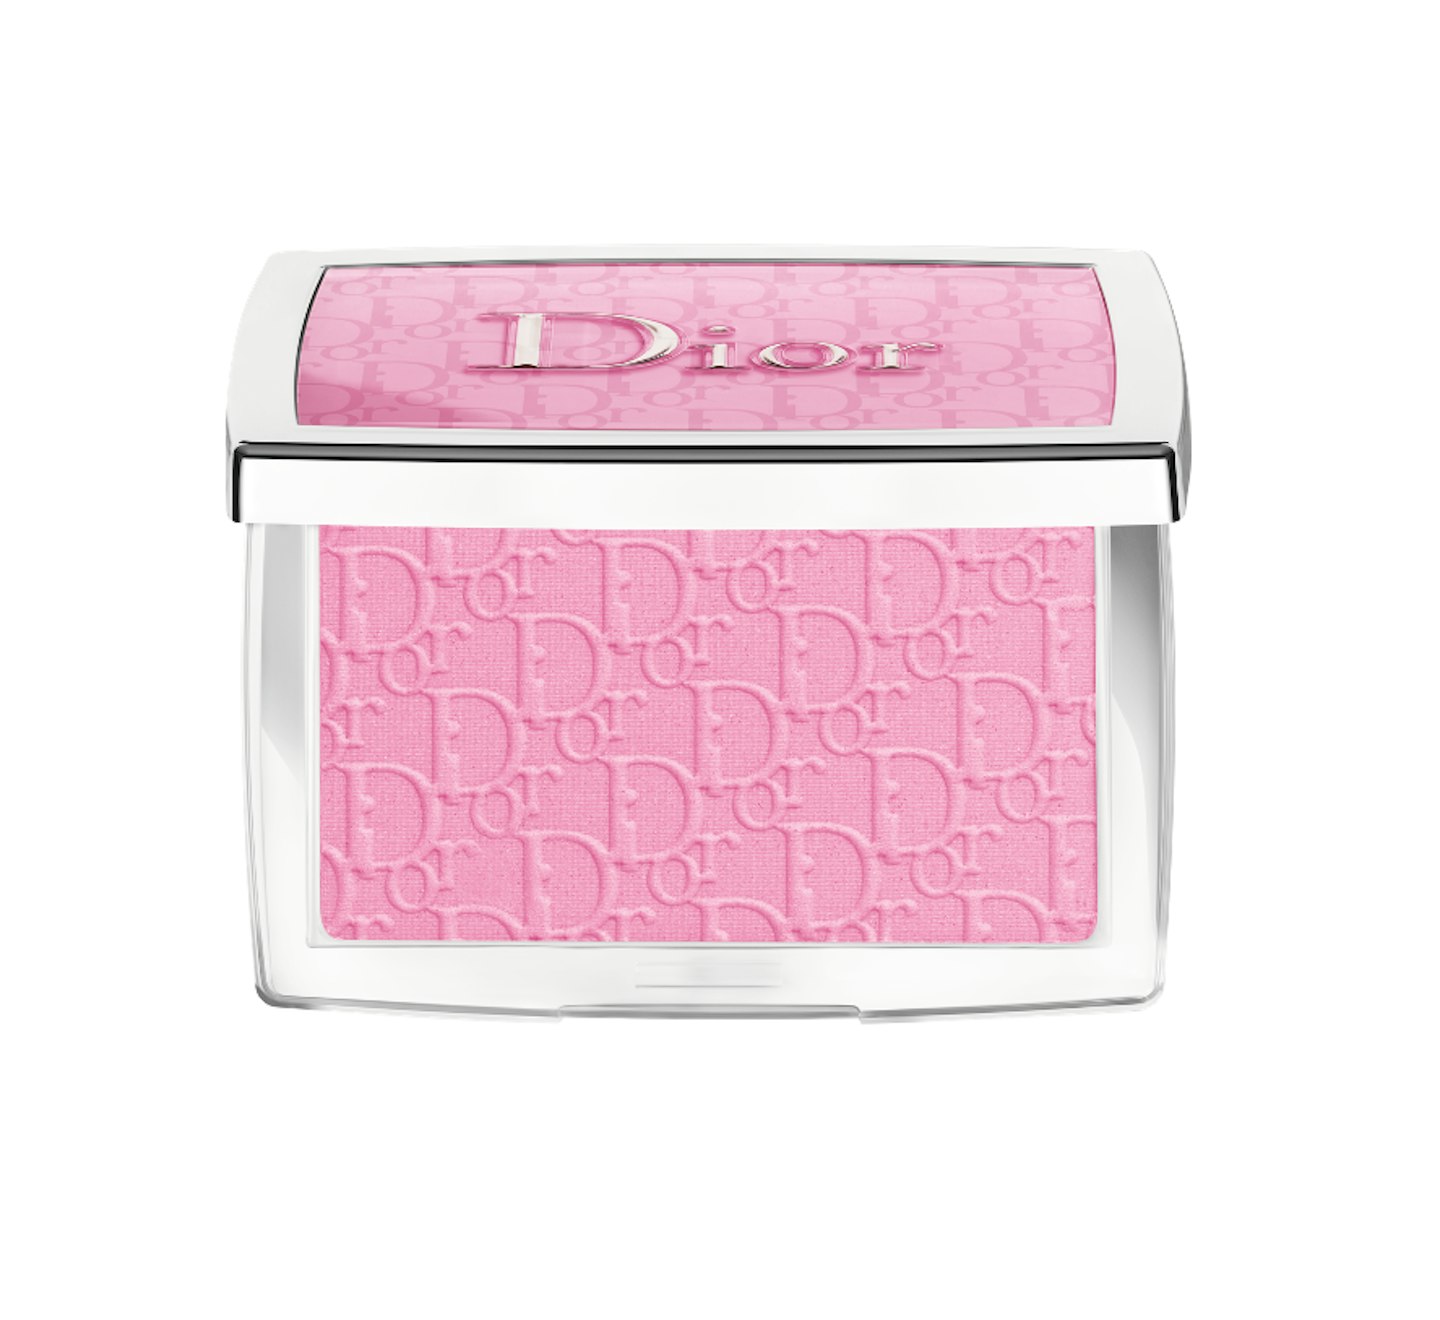 Dior Backstage Rosy Glow Blush in 001 Pink